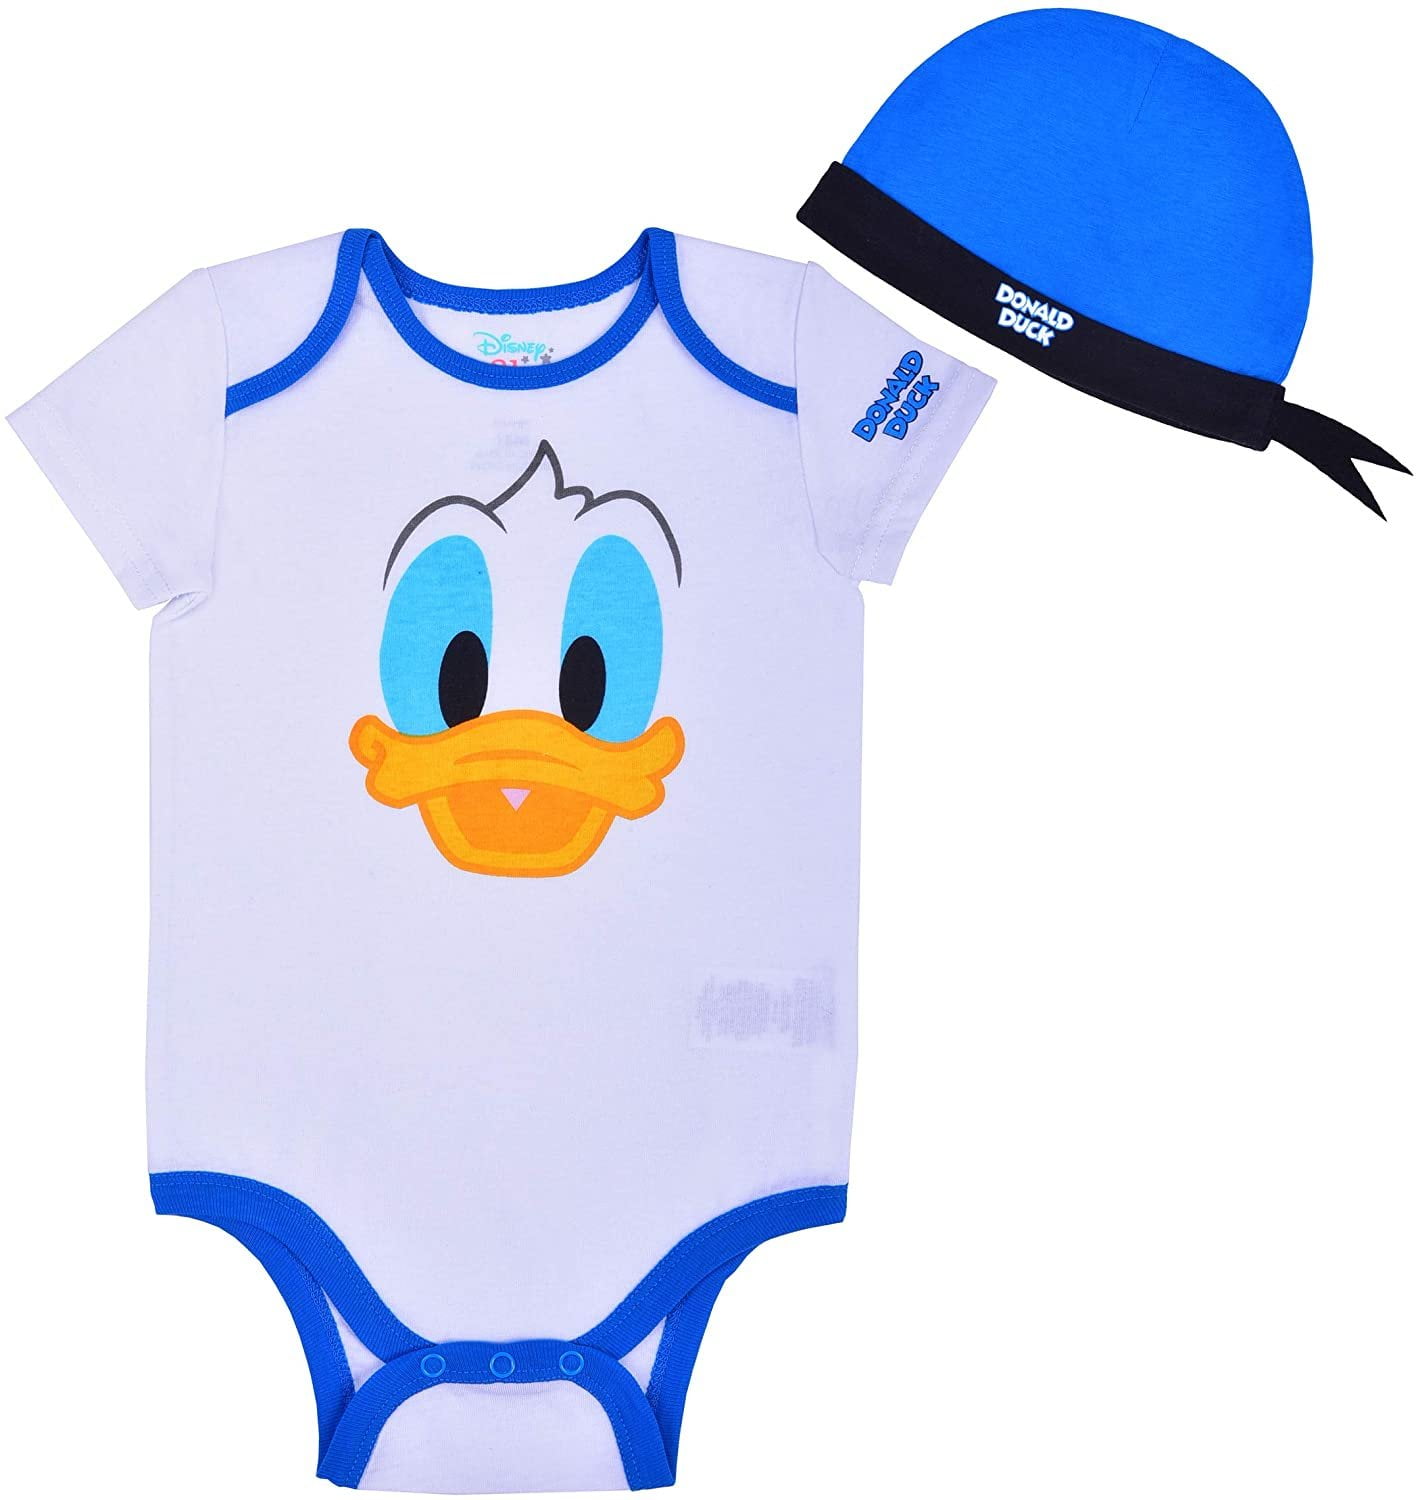 Blue Romper Set Disney Baby’s Short Sleeve Creeper with Cap Lilo and Stitch 